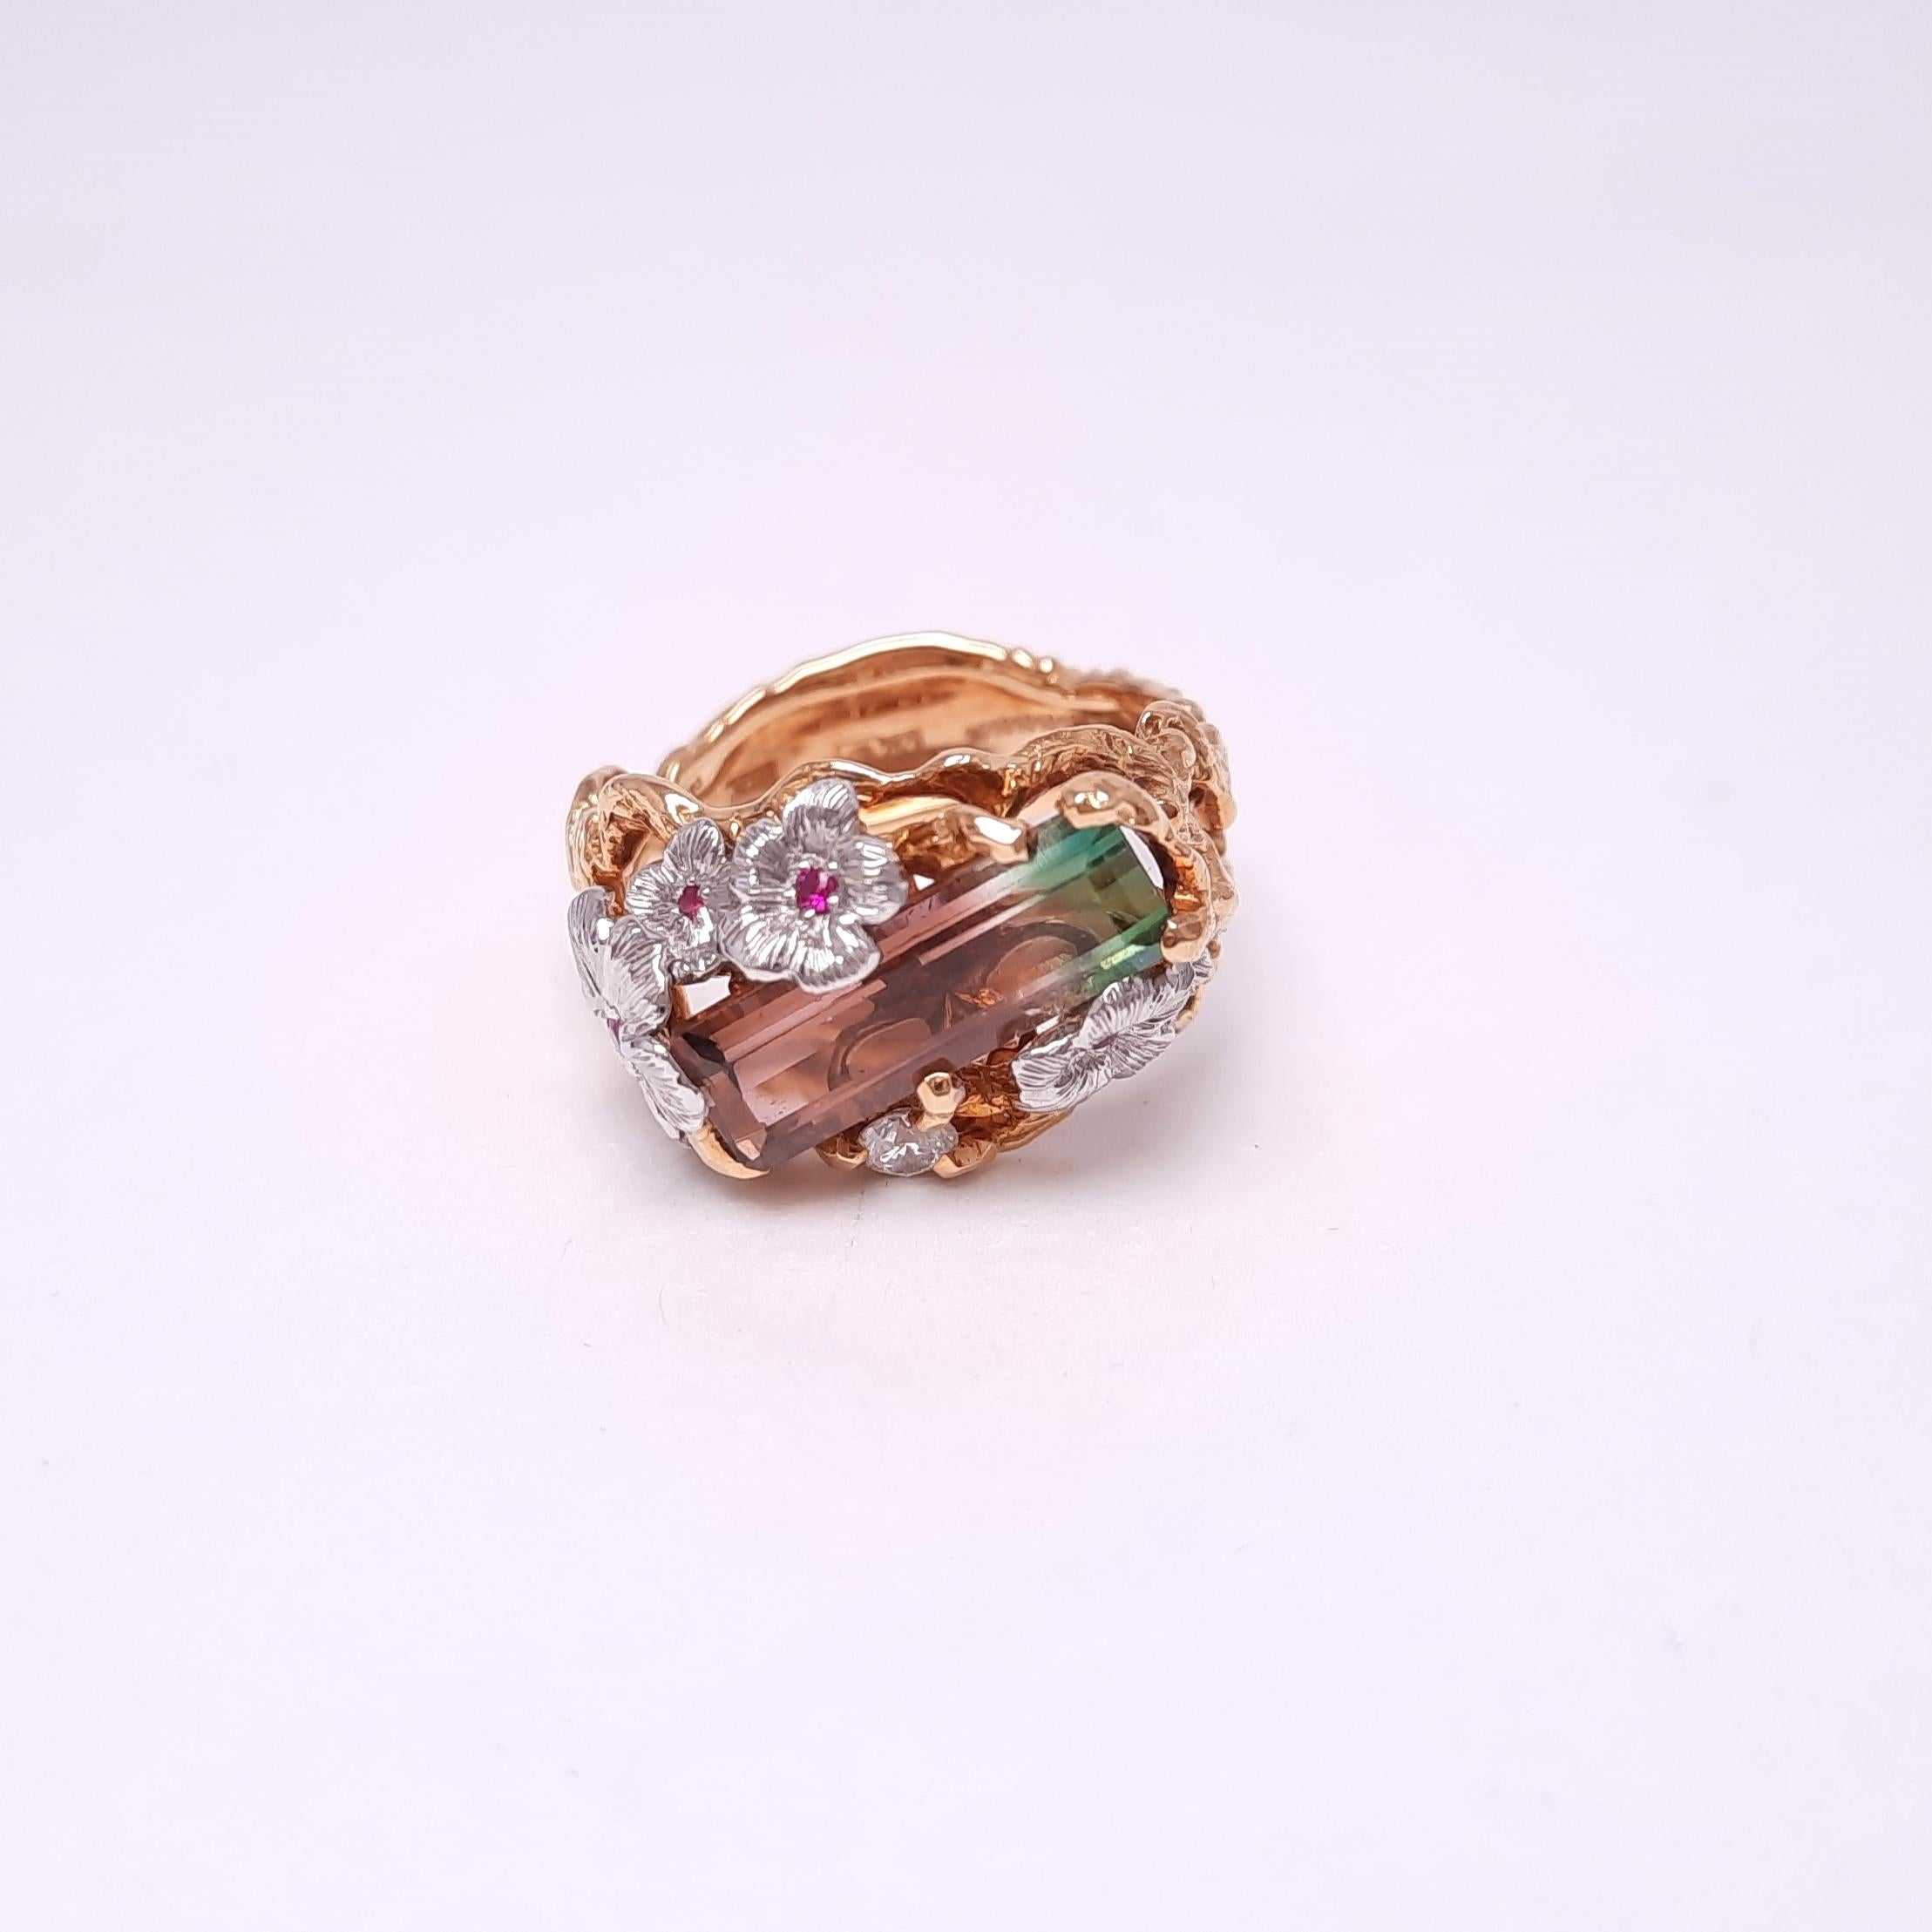 A unique watermelon color tourmaline is aesthetically designed in a tender floral style, celebrating the warm season.  The artistically engraved twig-like gold filigree and floral petals hold the tourmaline gently like a part of a natural scene.
The